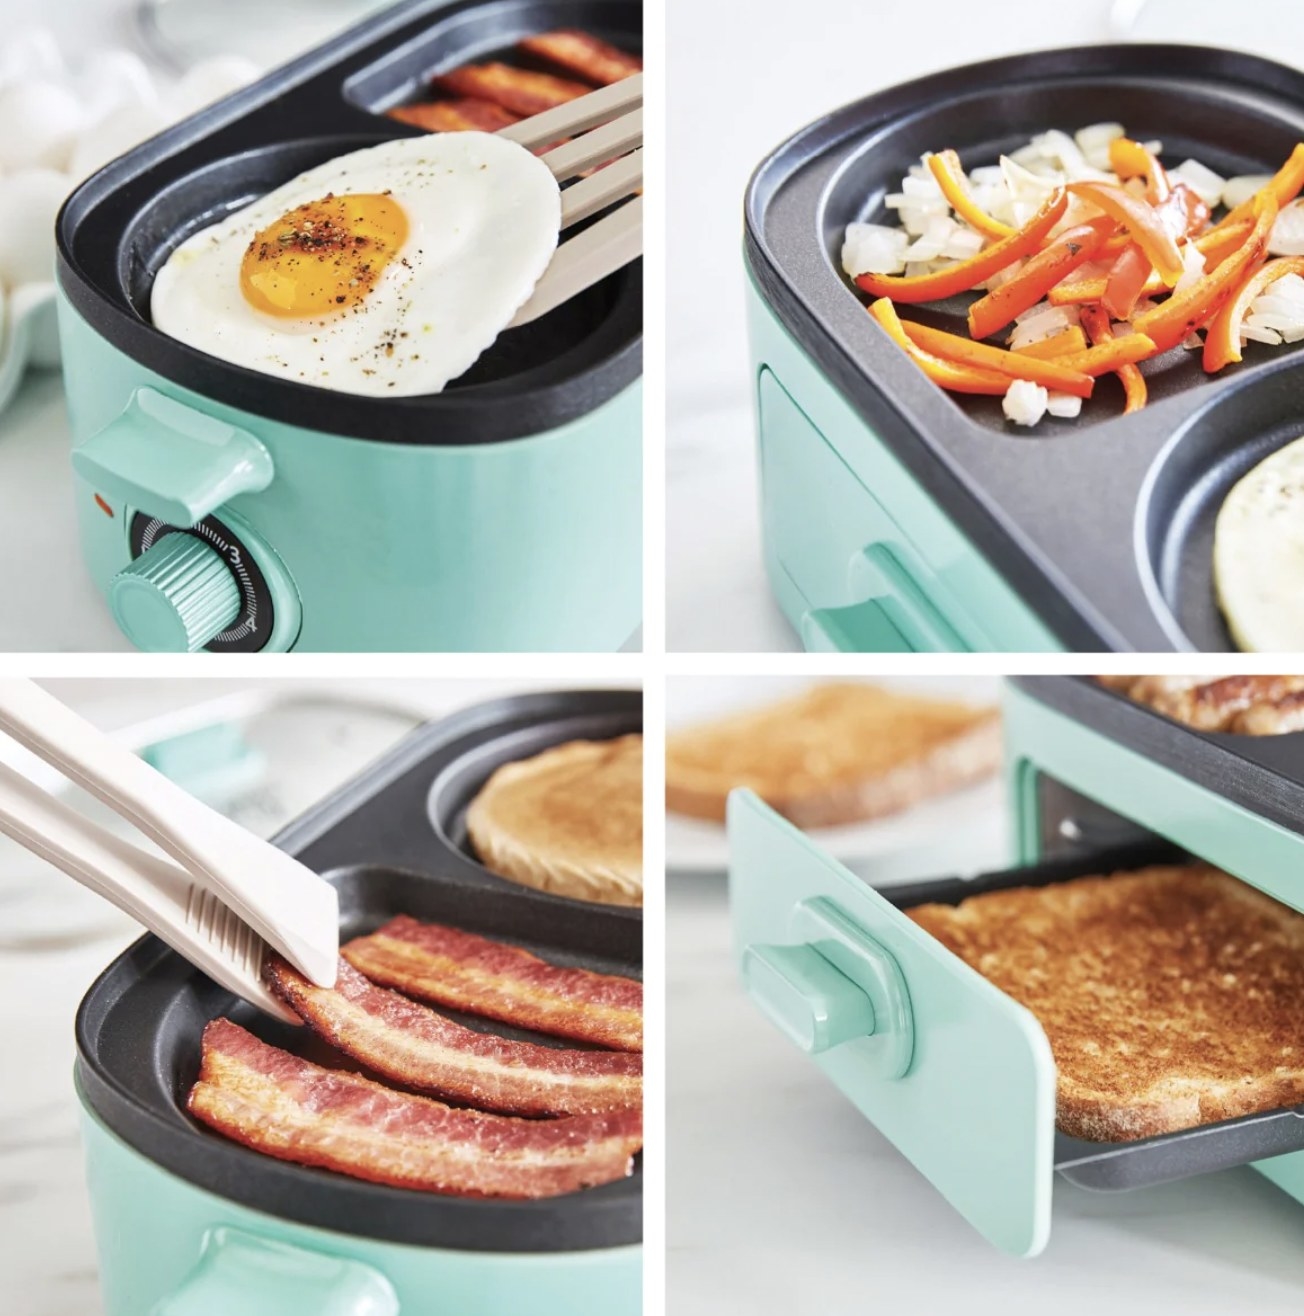 Four-way split image showing various angles of the teal breakfast maker: frying sunny side up egg (top left), veggies being grilled (top right), tongs flipping bacon strips (bottom left), and drawer on bottom pulled open to show brown toast (bottom right)